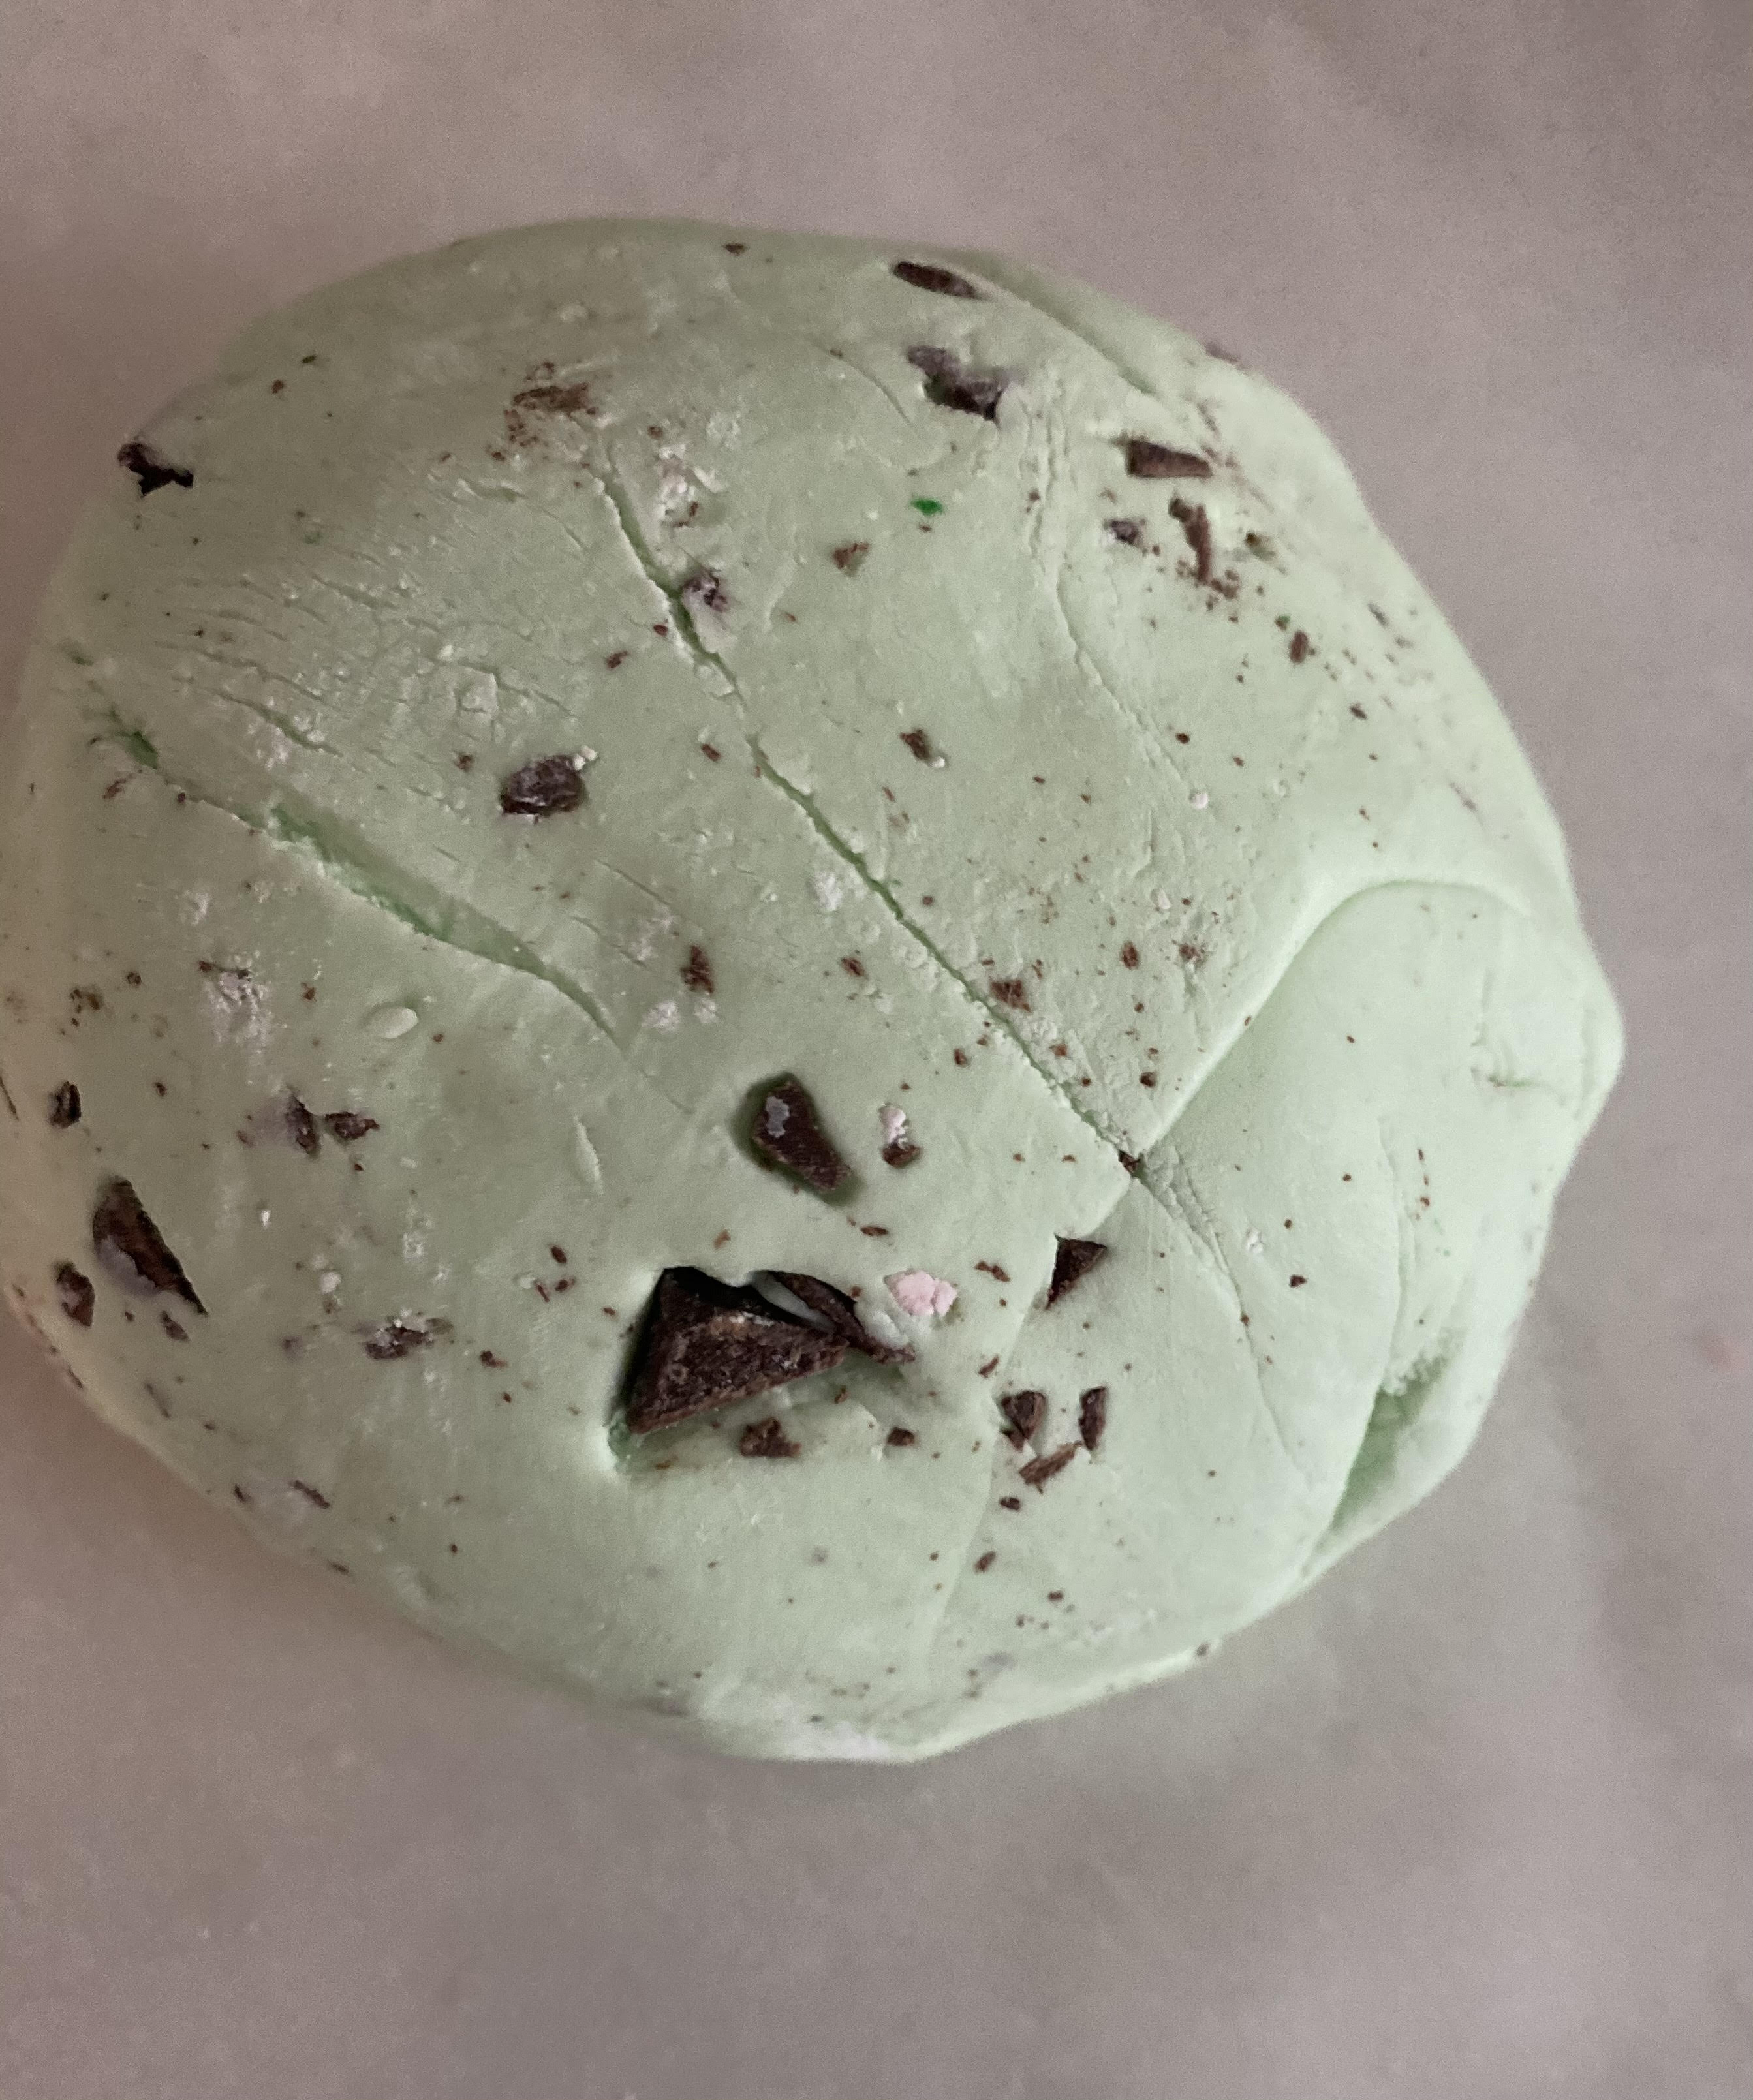 We added chocolate chips to our dough to look like ice cream so we could have an ice cream theme 